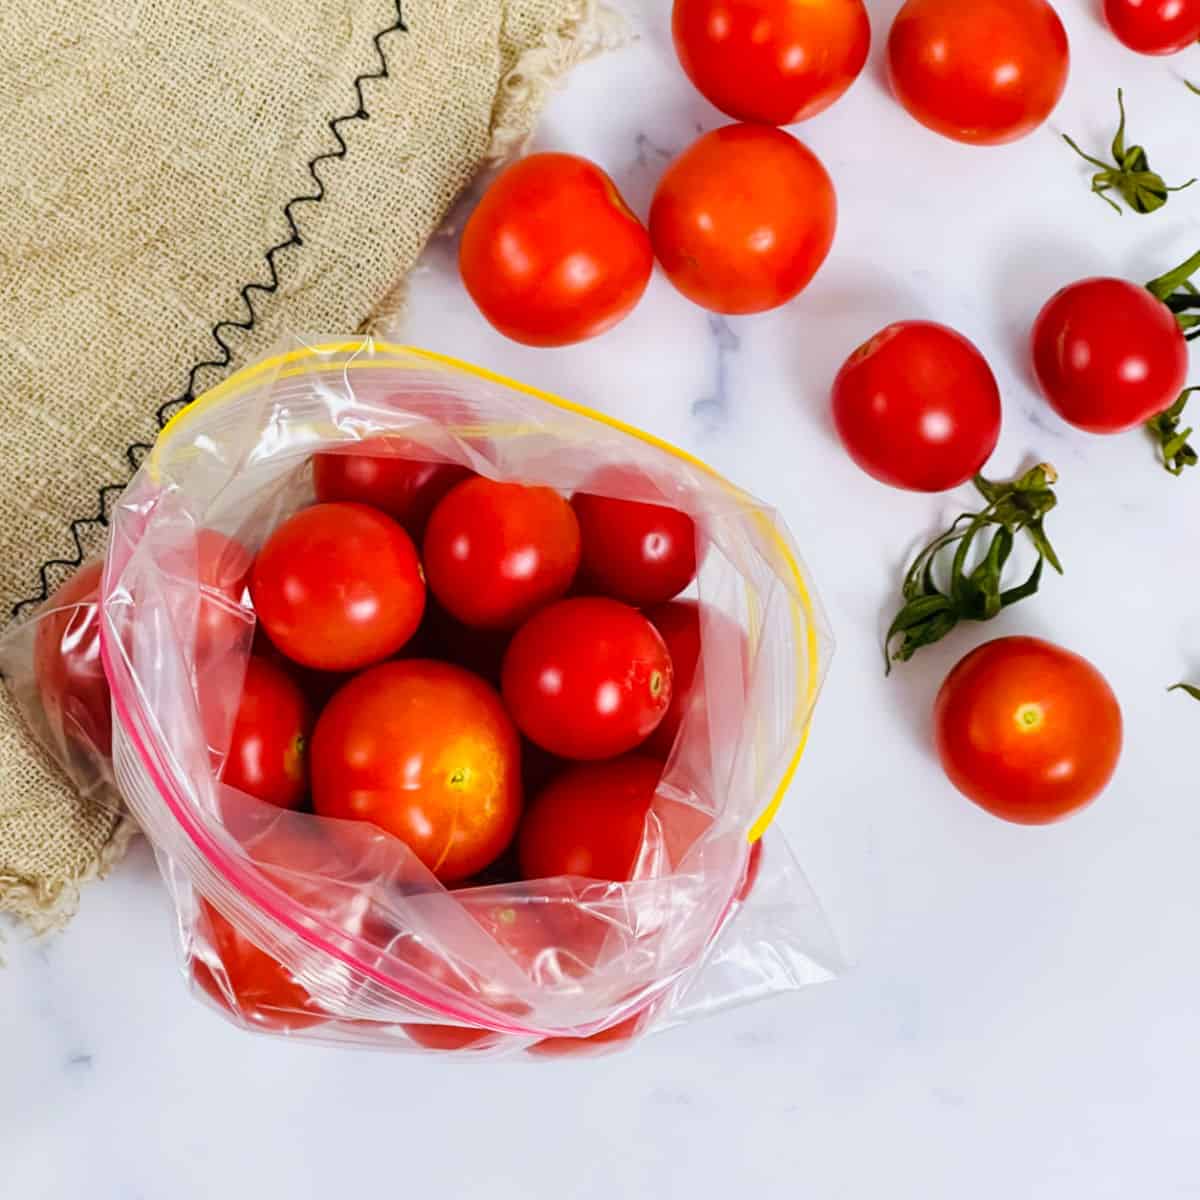 Step showing the filled tomatoes in a freezer-safe bag.